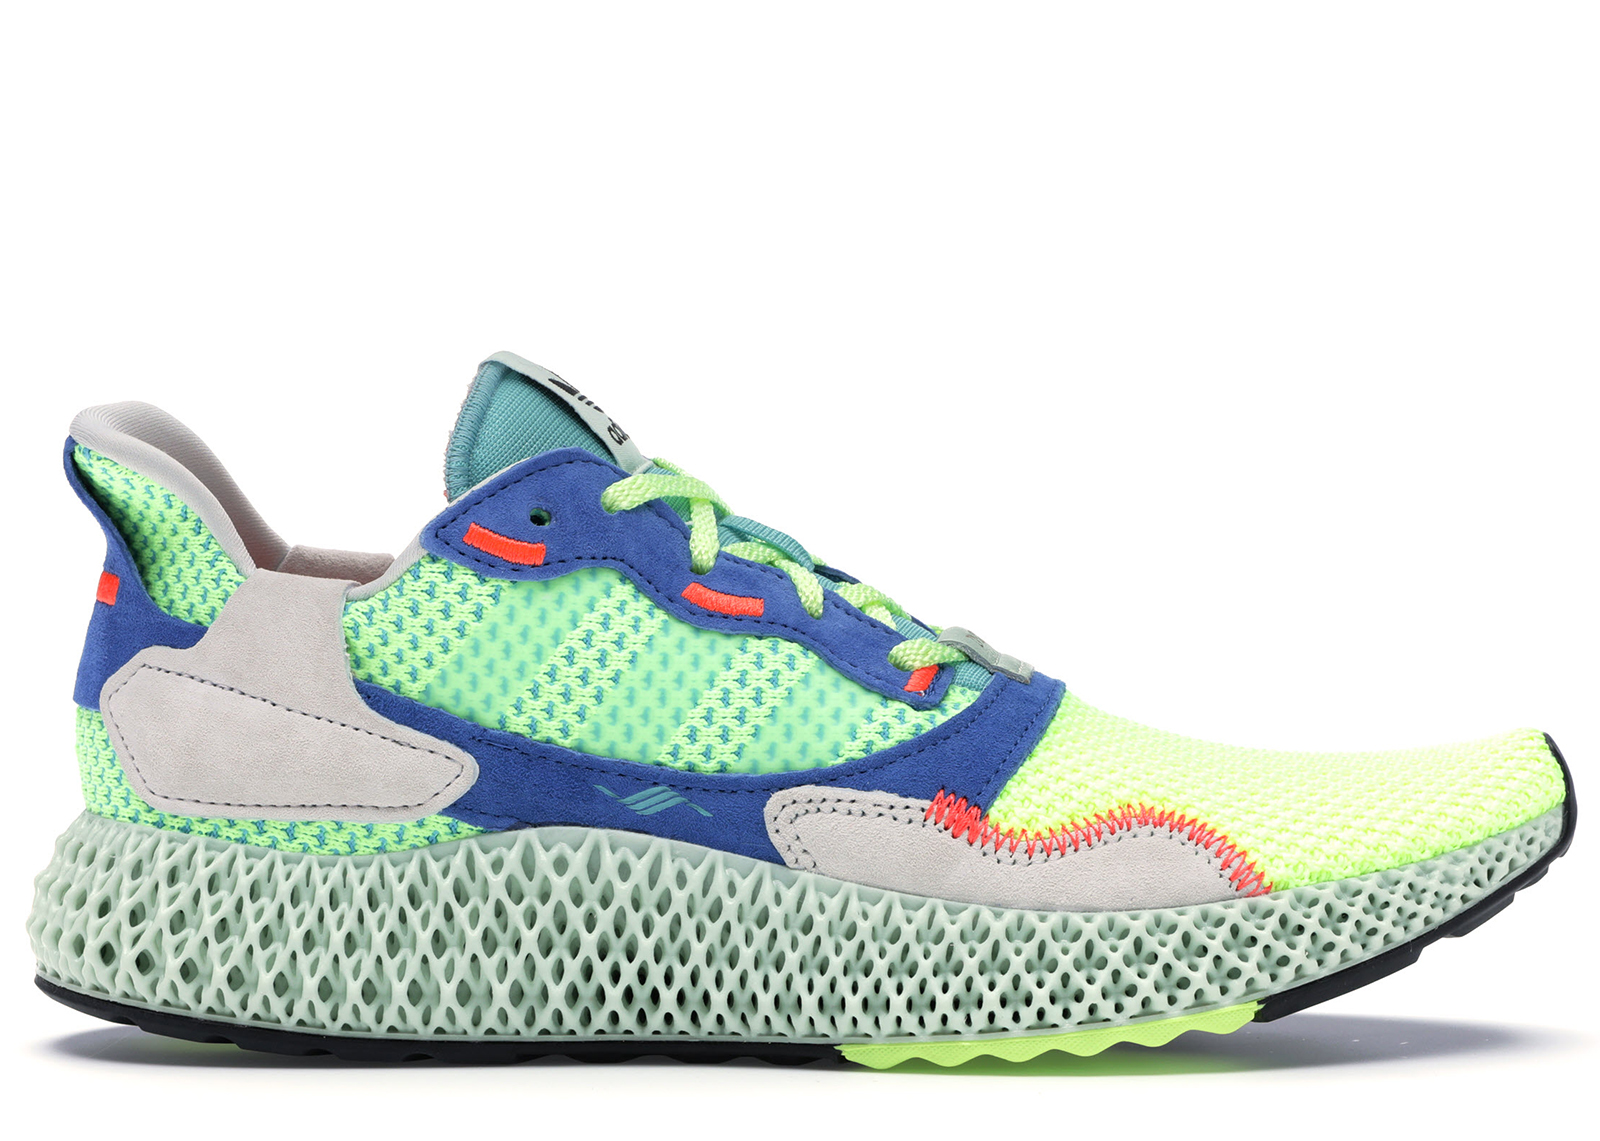 adidas ZX4000 4D Easy Mint - EF9623 - US